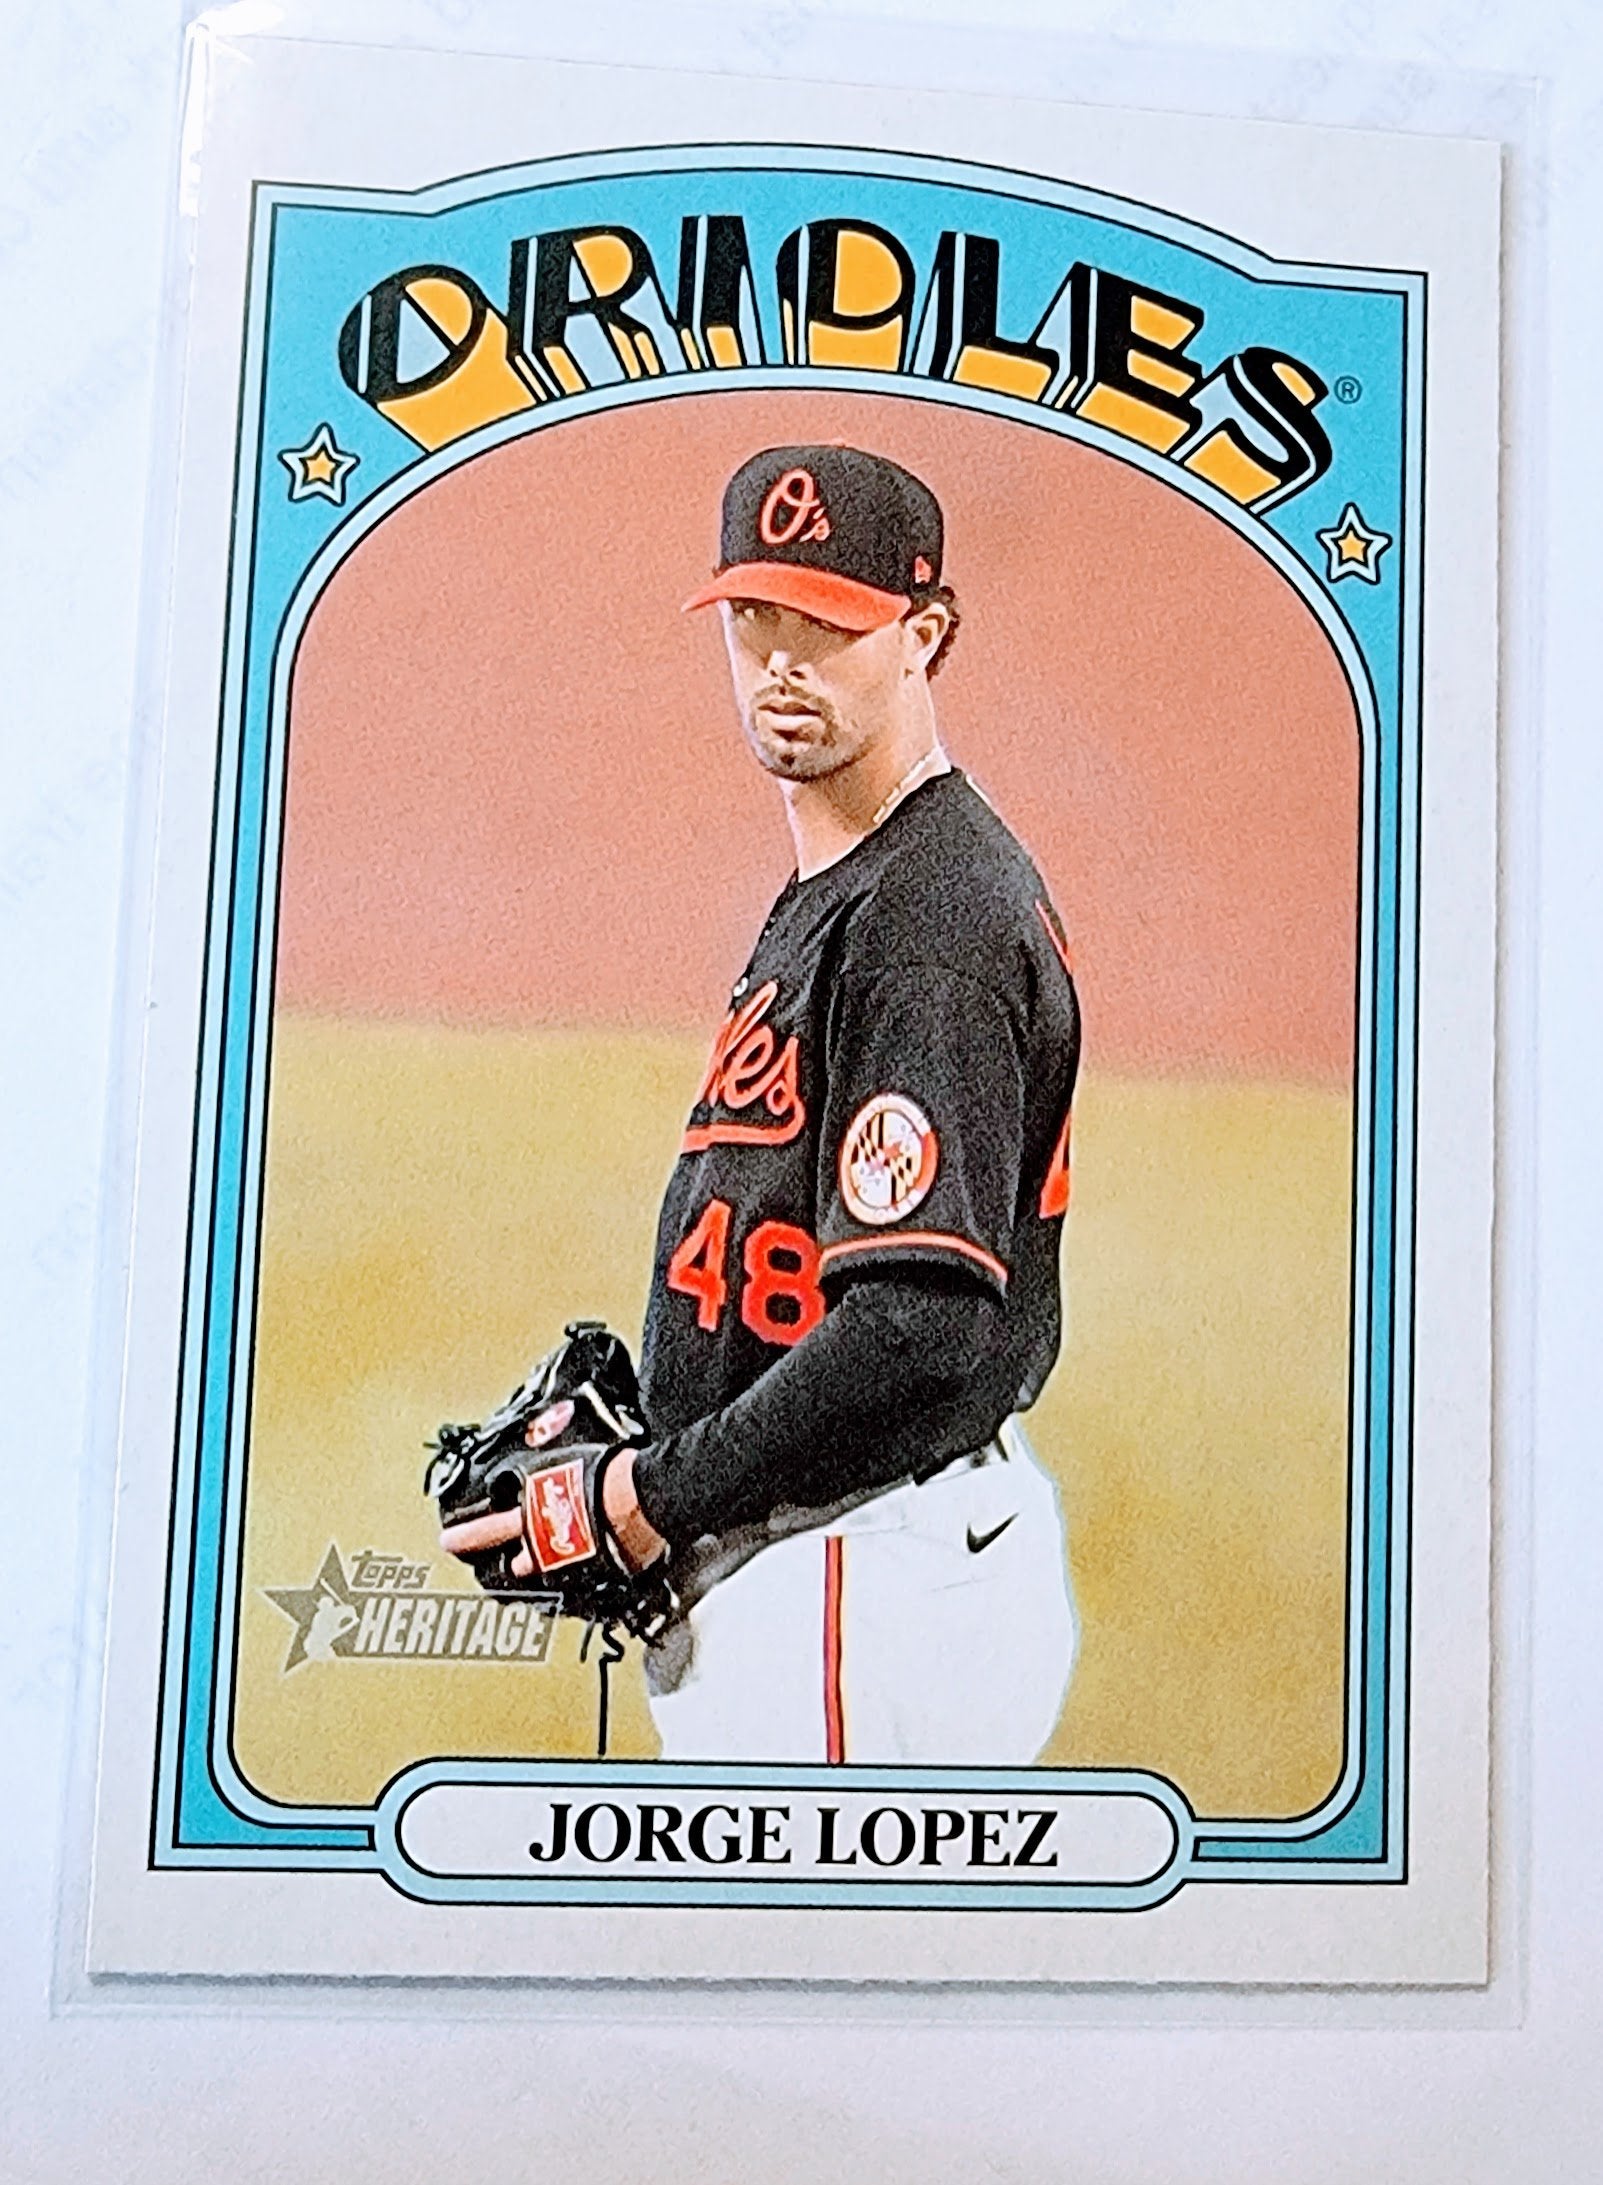 2021 Topps Heritage Jorge Lopez Baseball Trading Card MCSC1 simple Xclusive Collectibles   